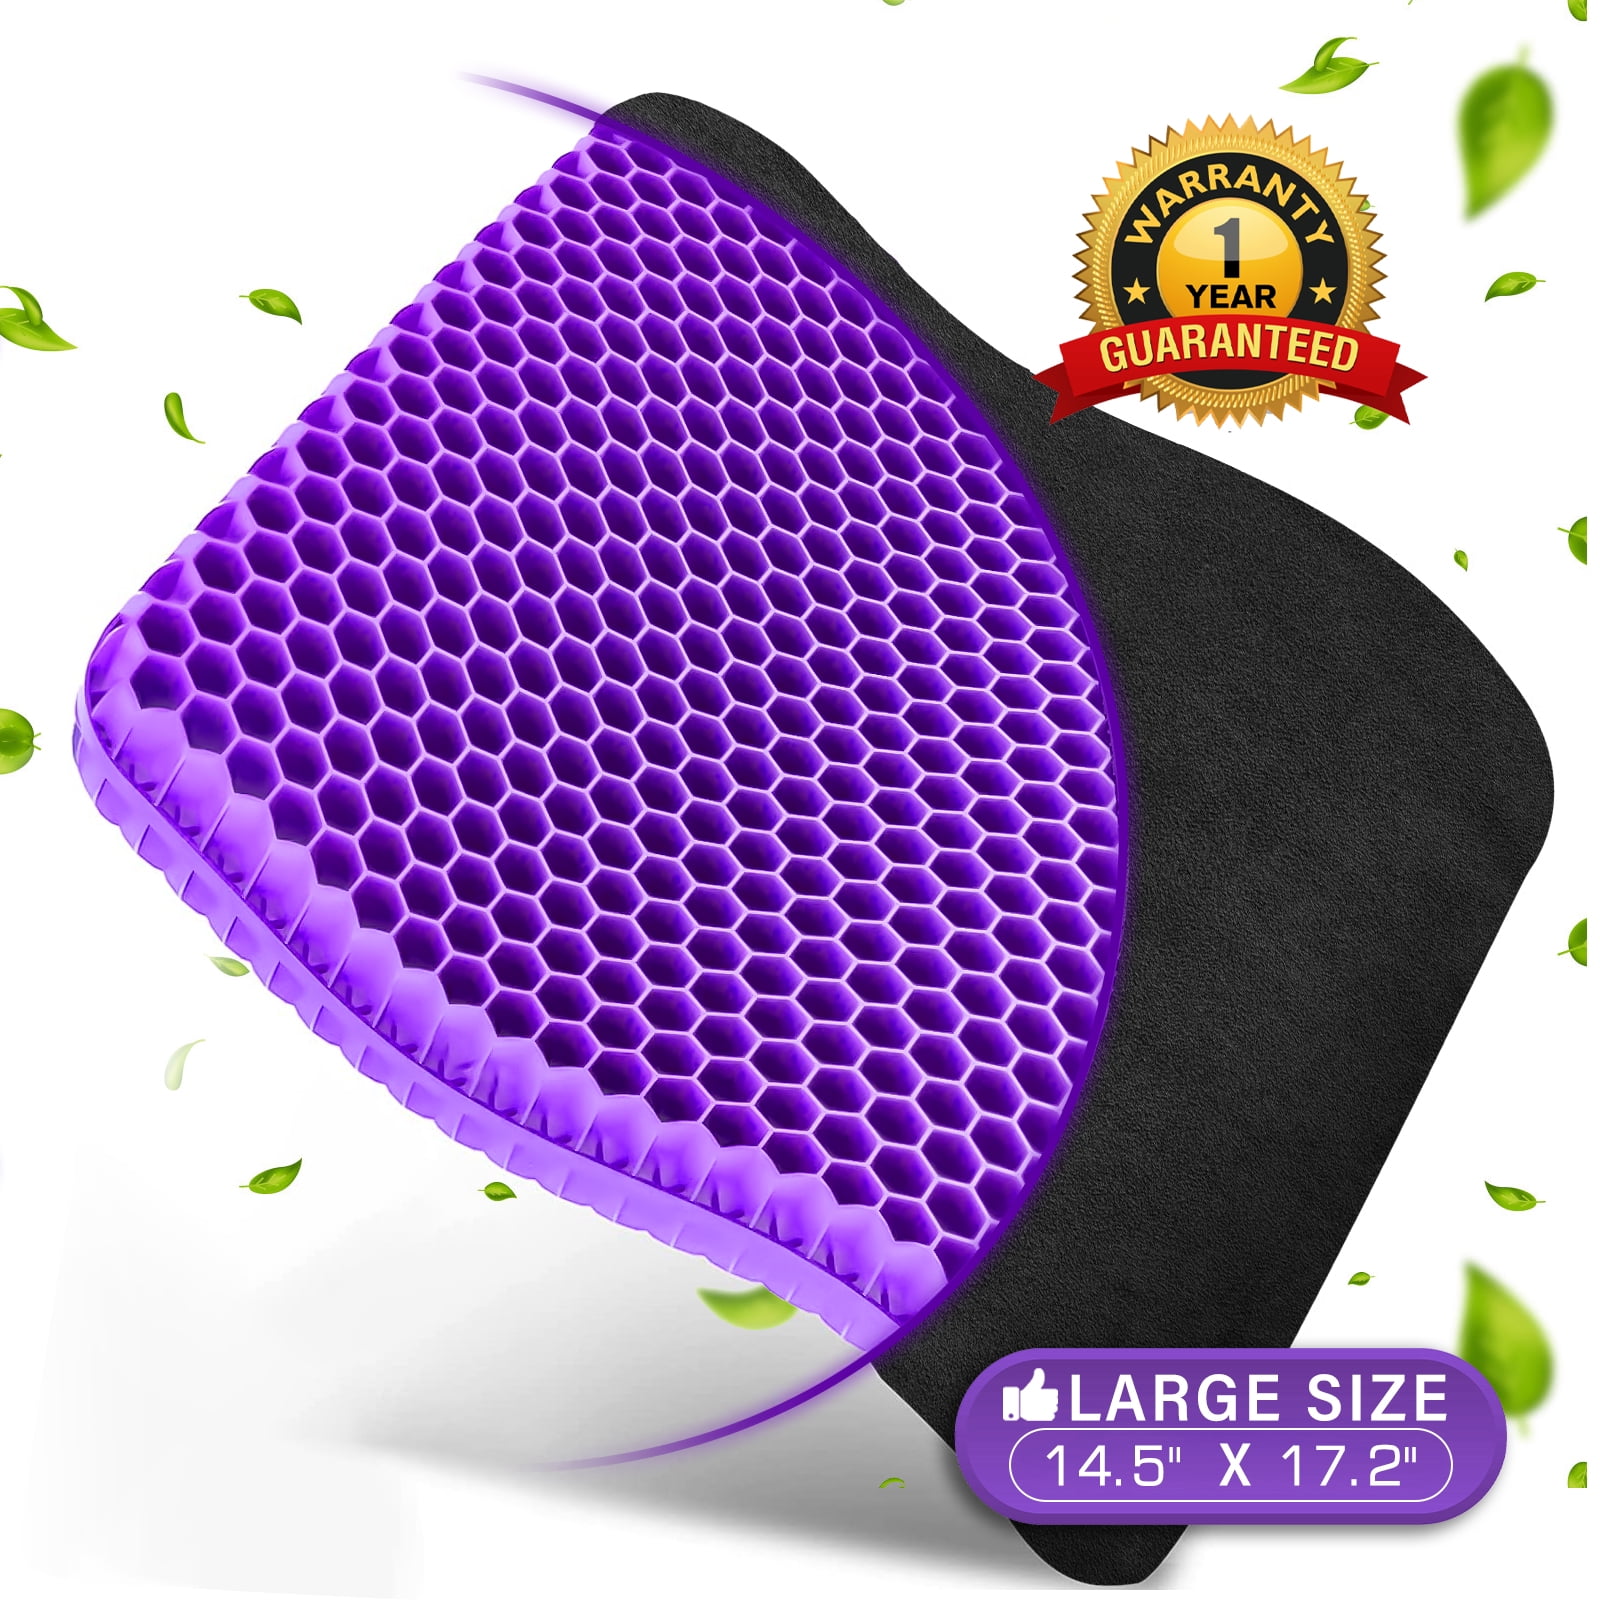 Gulymm Gel Seat Cushion, Office Egg Seat Cushion for Long Sitting, Chair  Pads with Large Size Double Thick Breathable Honeycomb Design, Pressure  Relief, Wheelchair Car Seat Cushion for Relieves Spinal Pain 